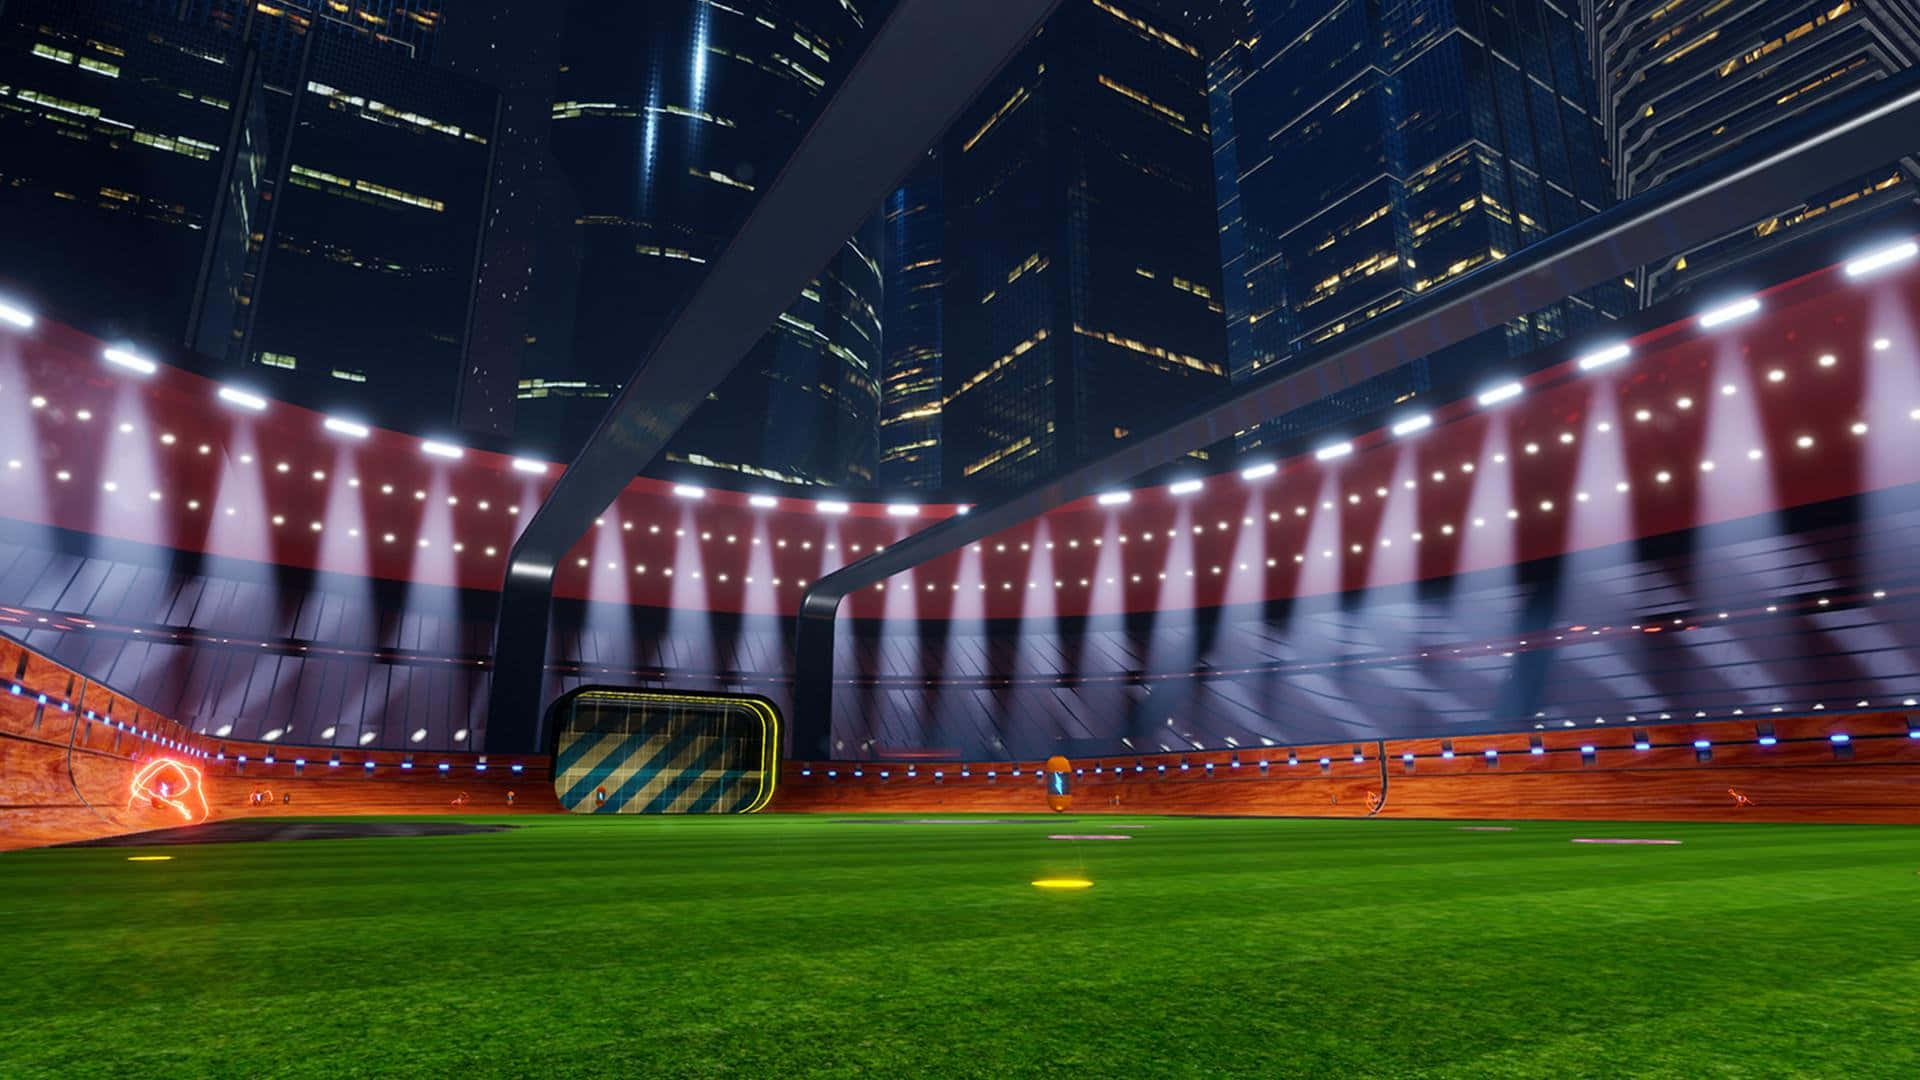 A Soccer Field With Lights And A Stadium